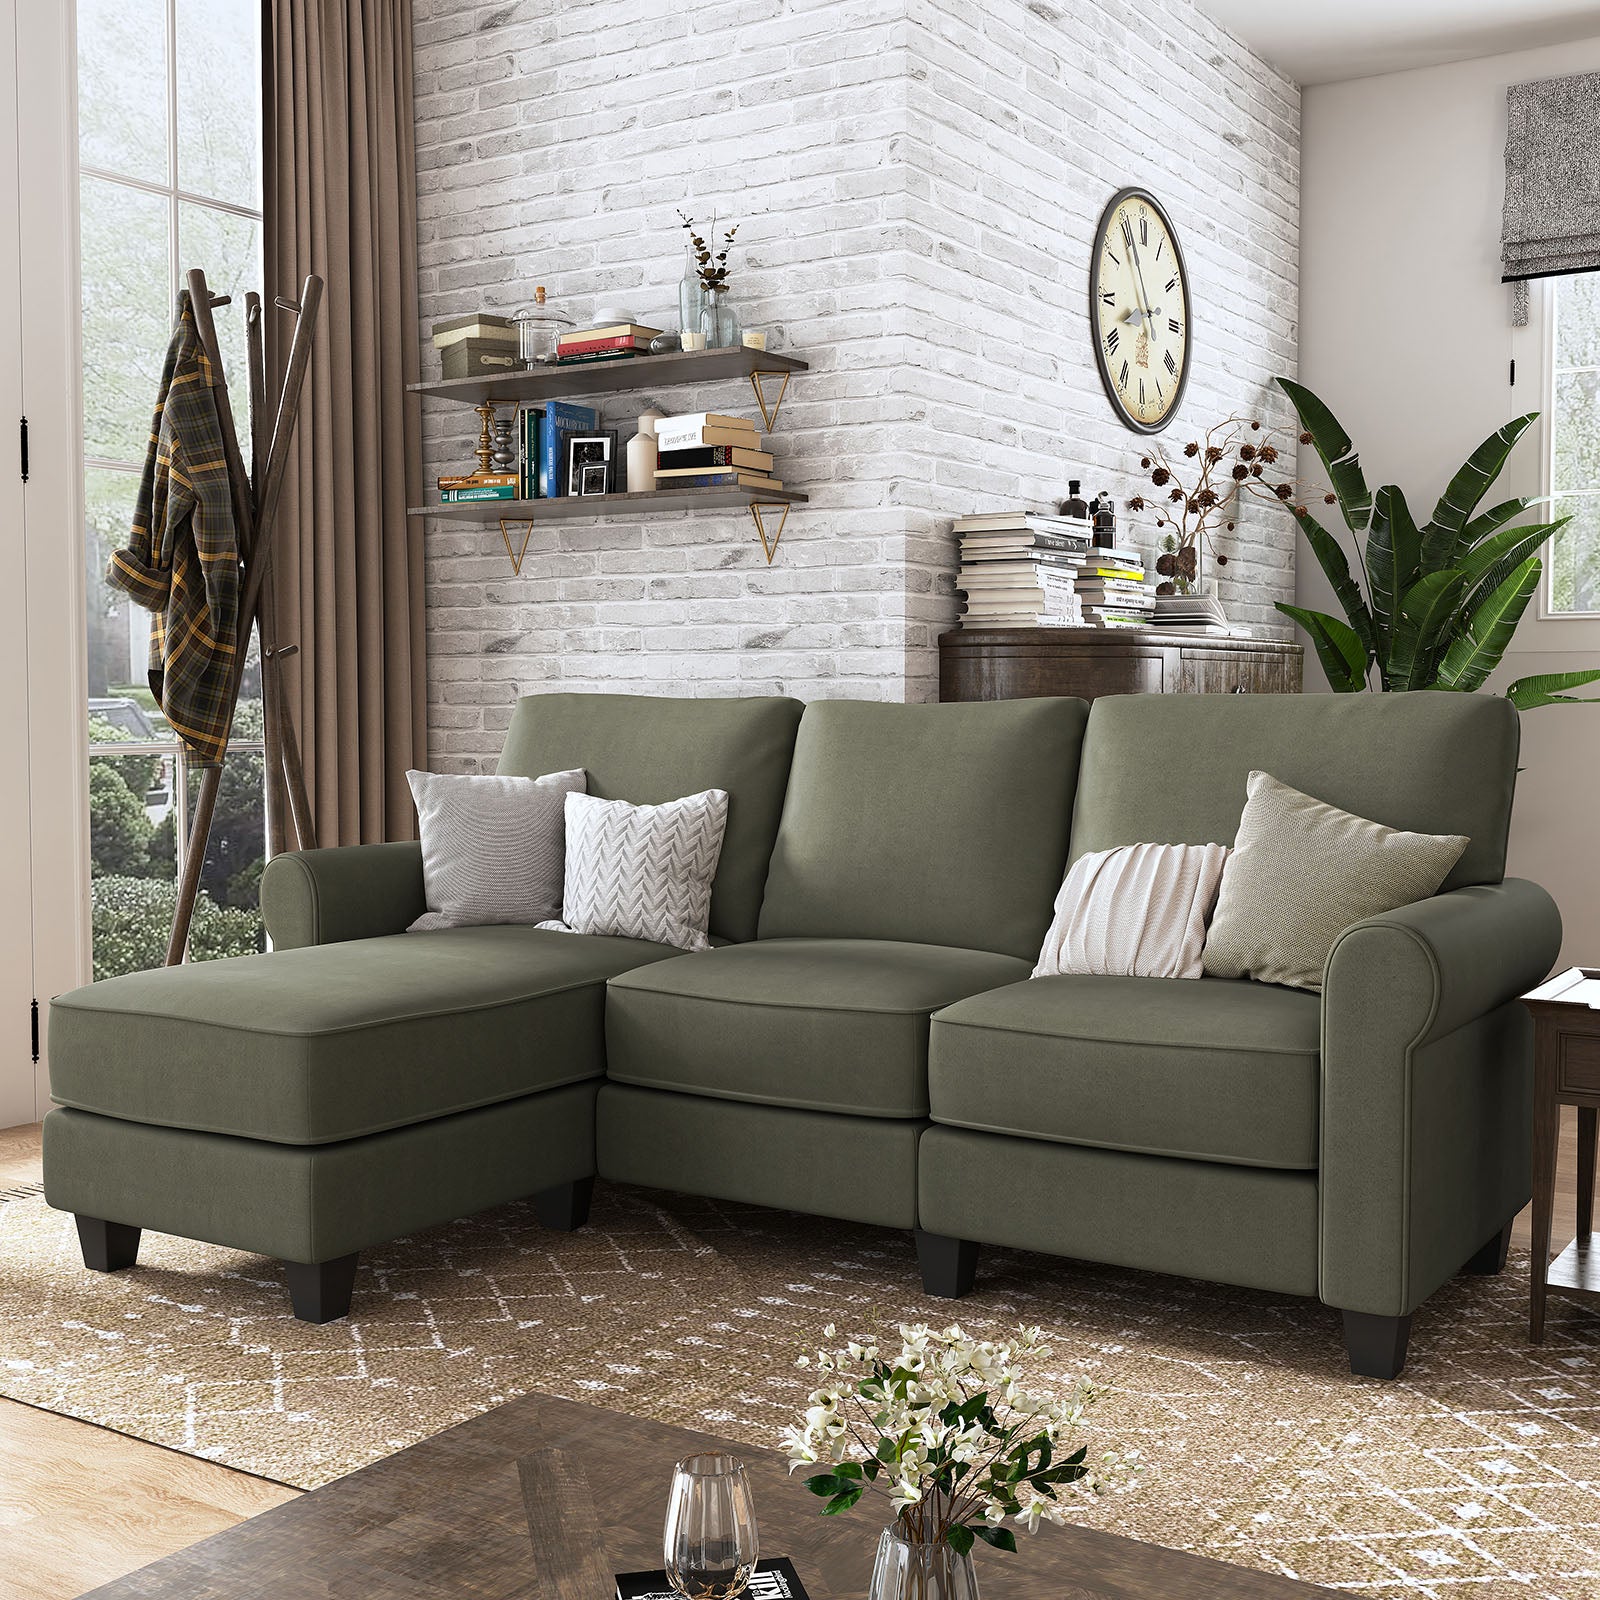 NOLANY Green L Shaped Sectional Sofa 